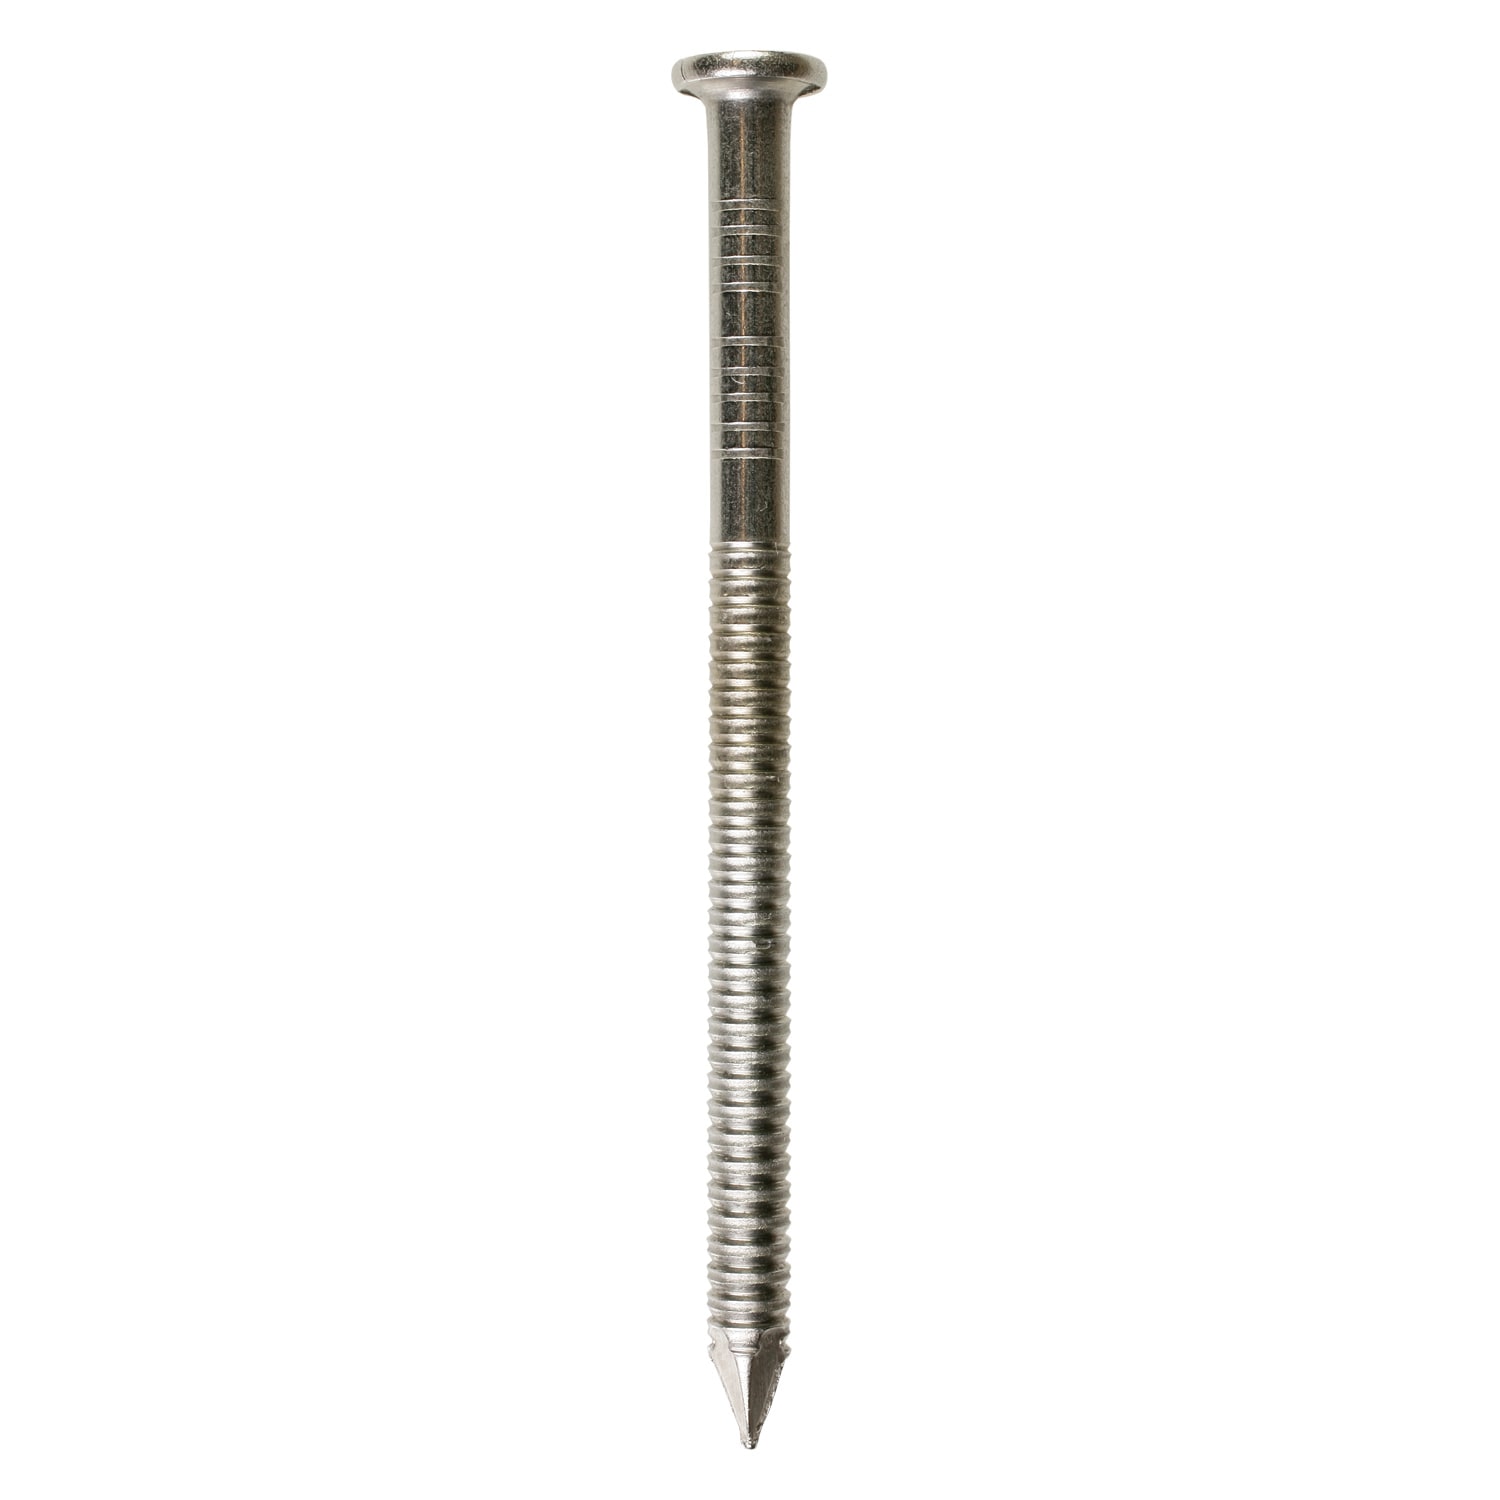 Galvanised Screw Nails Spiral Shank Nails Bright Steel 5 Sizes 40 50 70 90 100 